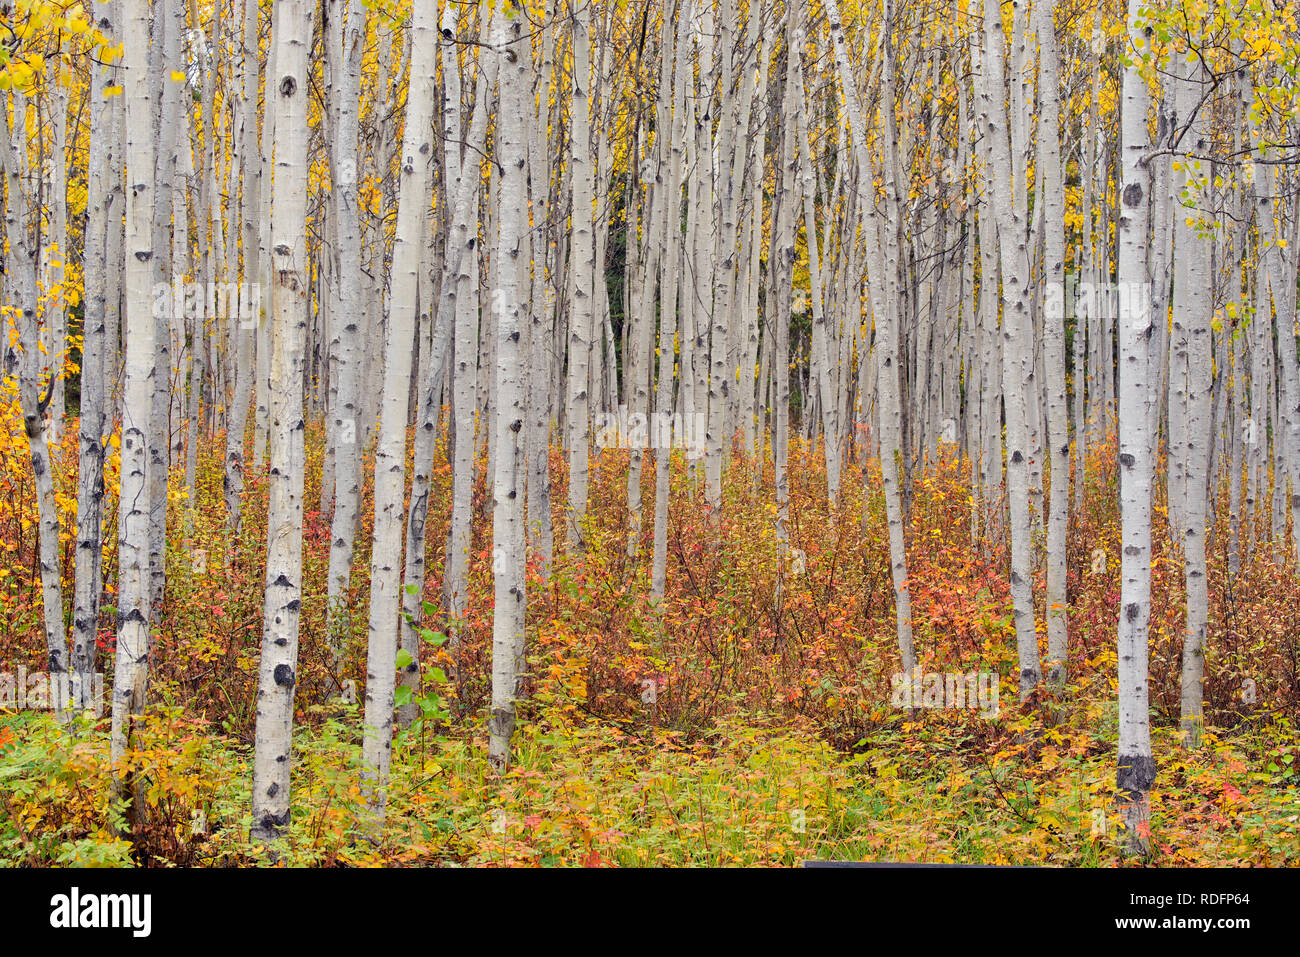 Aspen woodland with autumn wild rose in the understory, Fort Providence, Northwest Territories, Canada Stock Photo